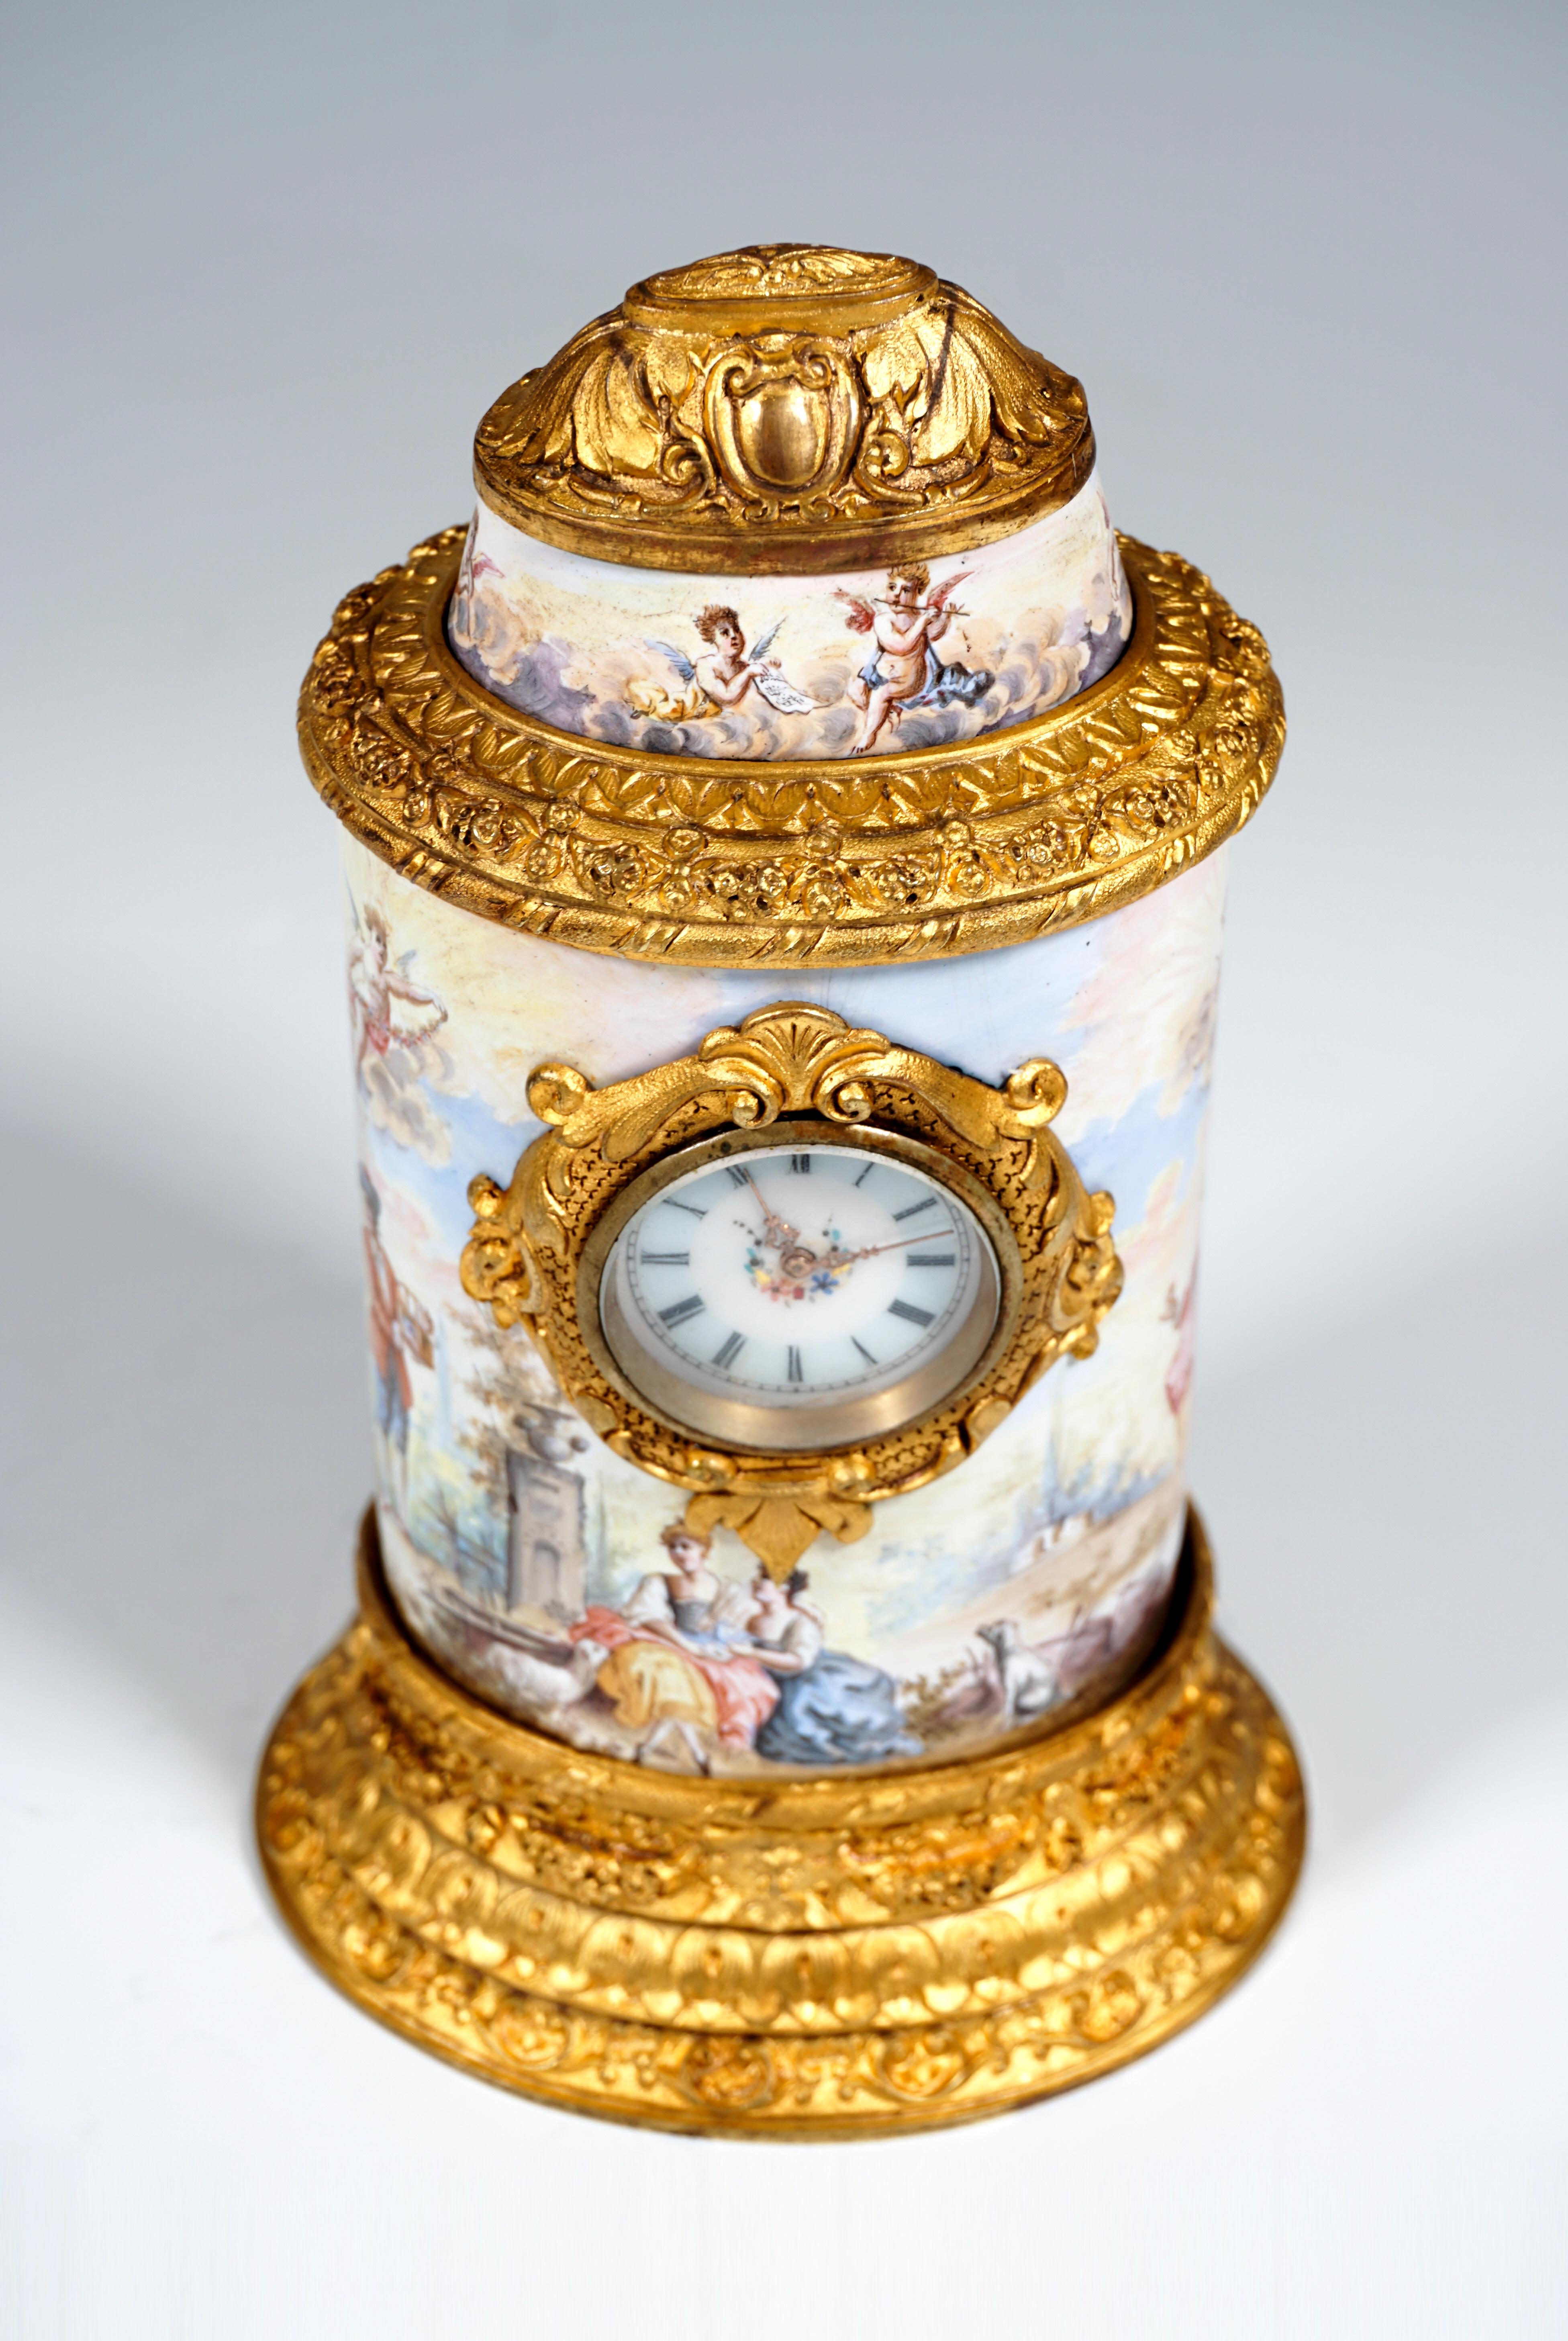 Rococo 19th Century Viennese Enamel Table Clock with Fire-Gilding and Watteau Painting For Sale